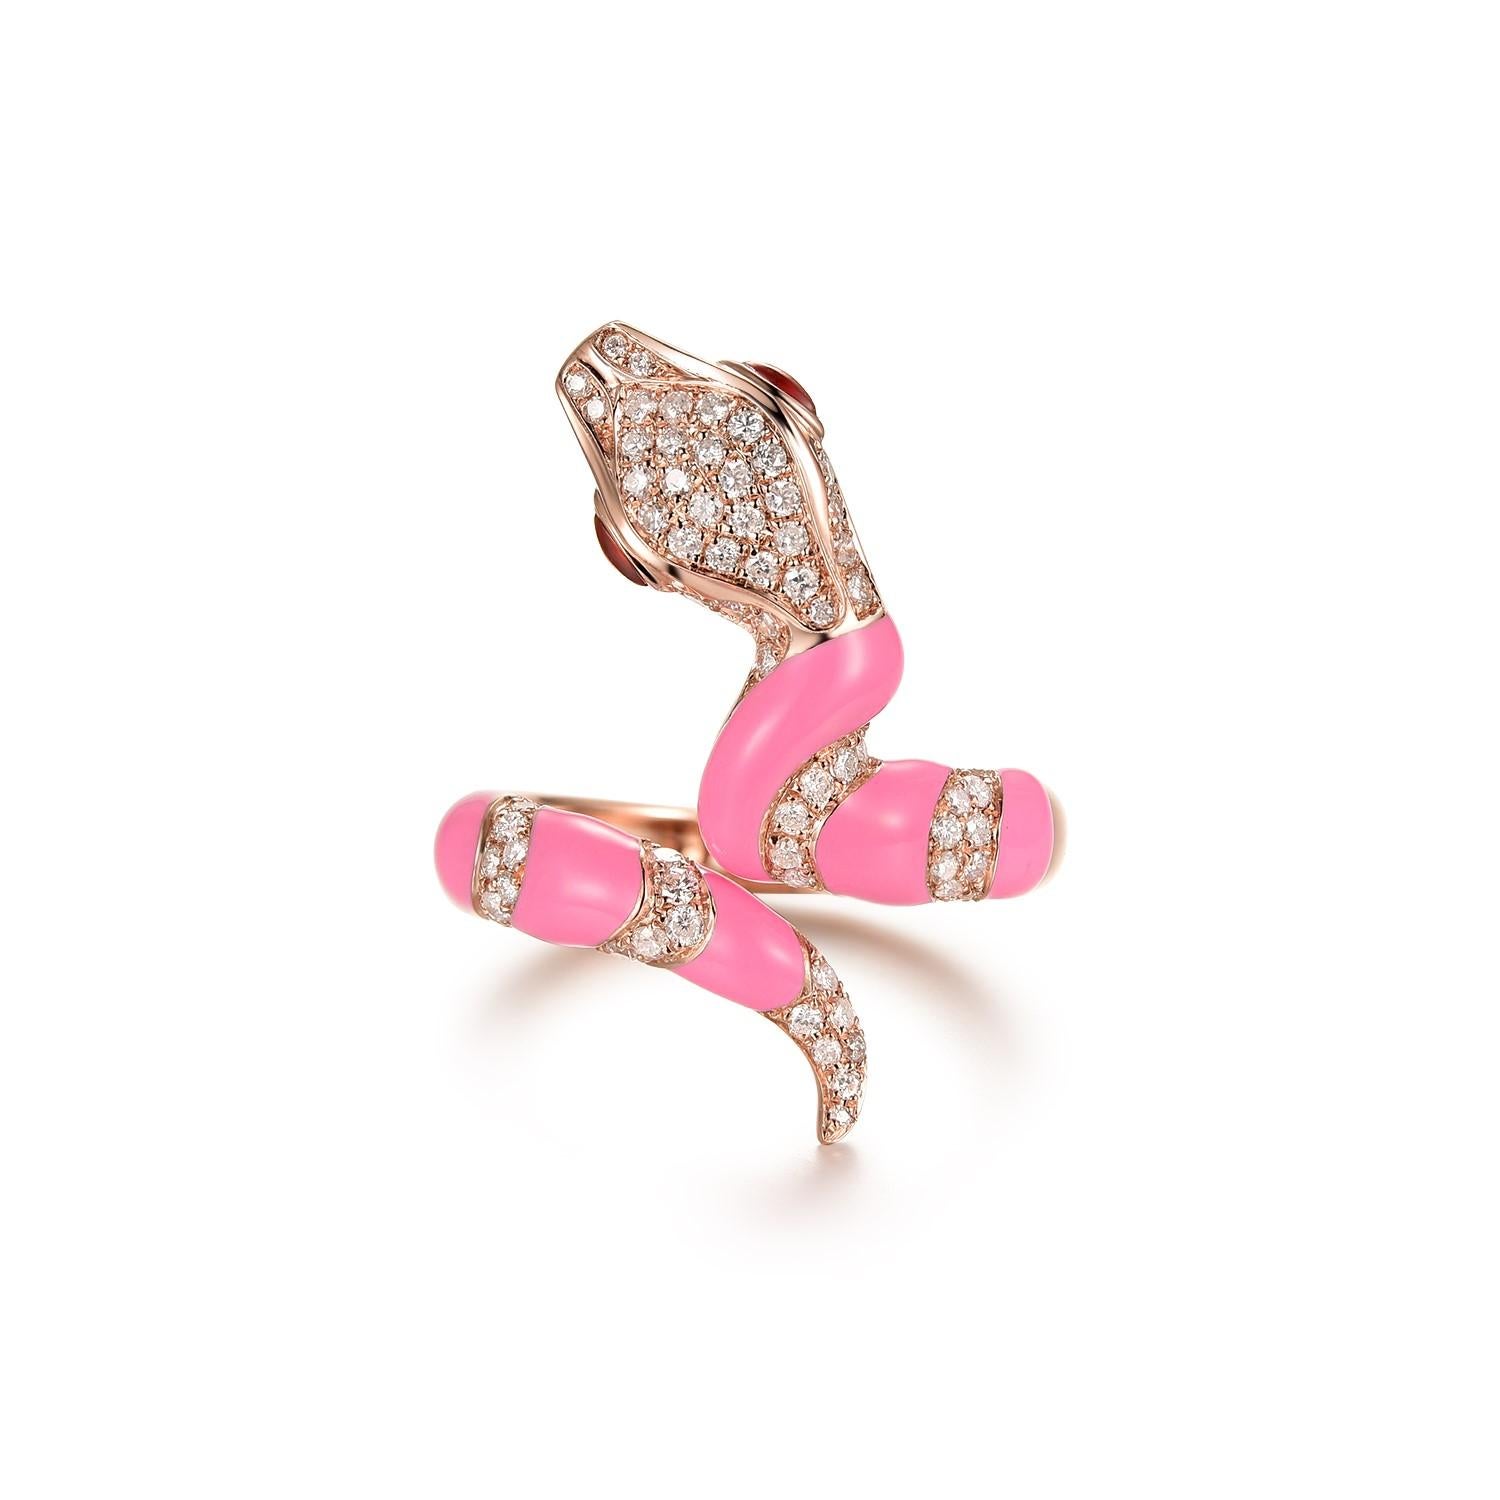 This stunning snake ring features 0.6 carat of white round diamonds, the body is covered with pink enamel. The eyes of the ring is set with green jade. The snake can be customized in any color or stones. Feel free to contact me for inquiry. More